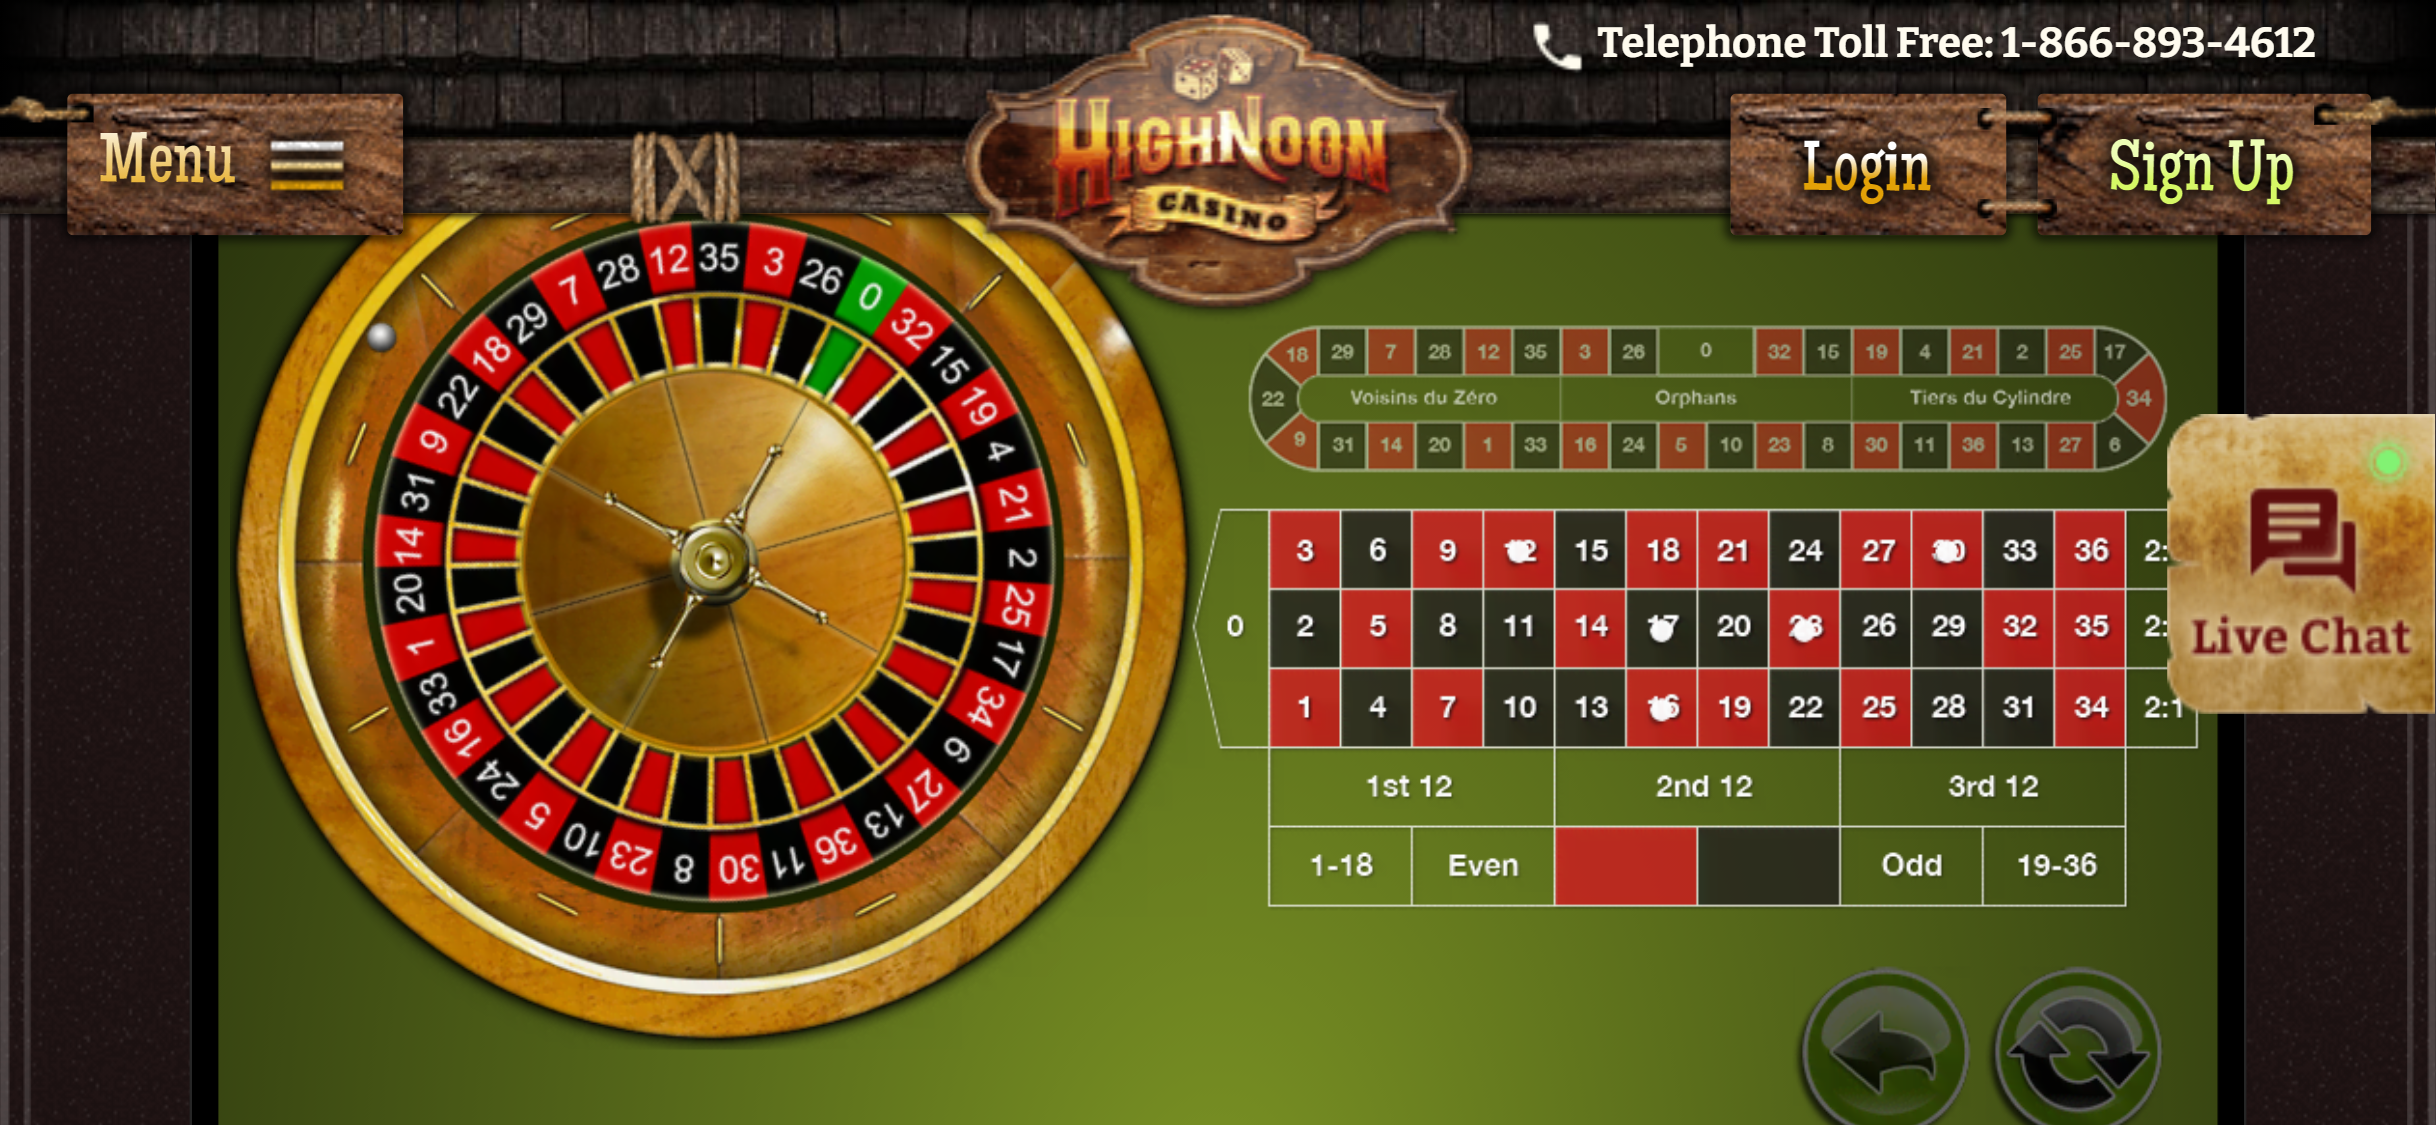 High Noon Casino Mobile Casino Games Review